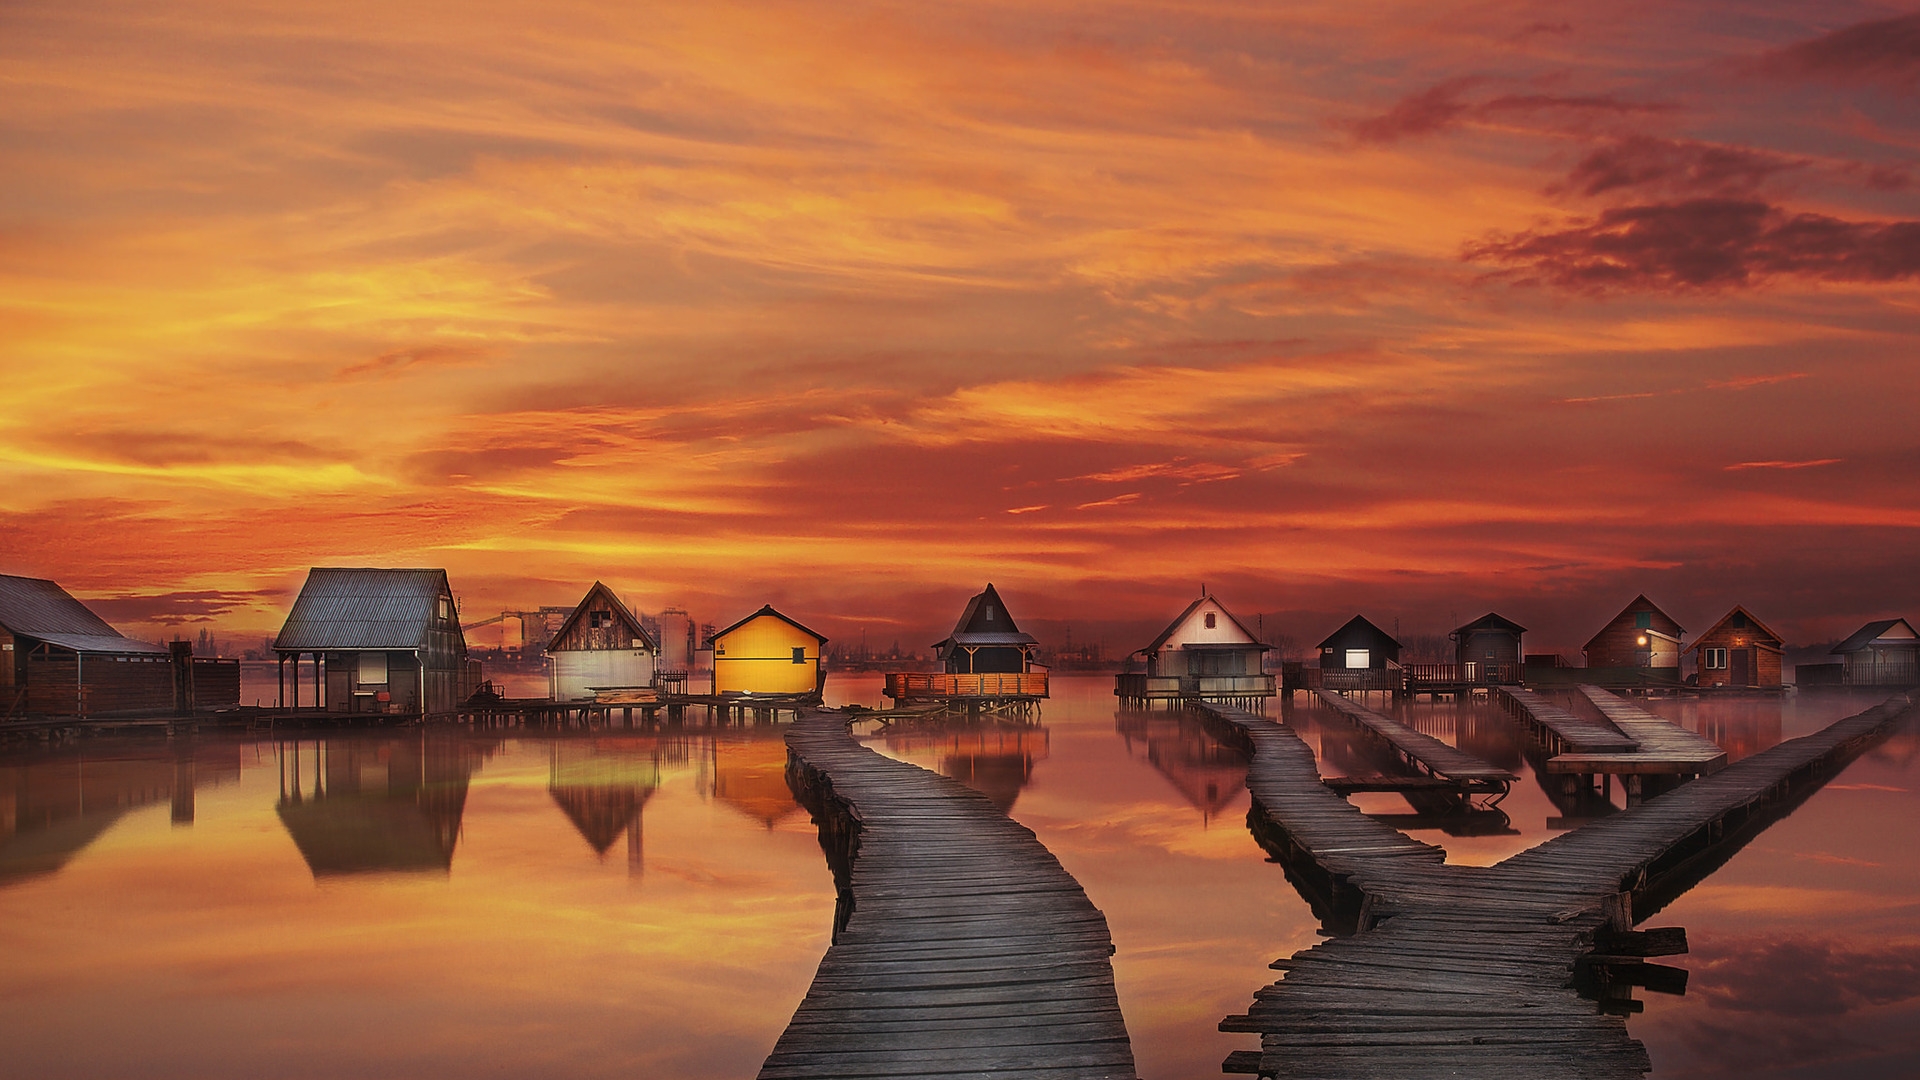 Houses on Water for 1920 x 1080 HDTV 1080p resolution